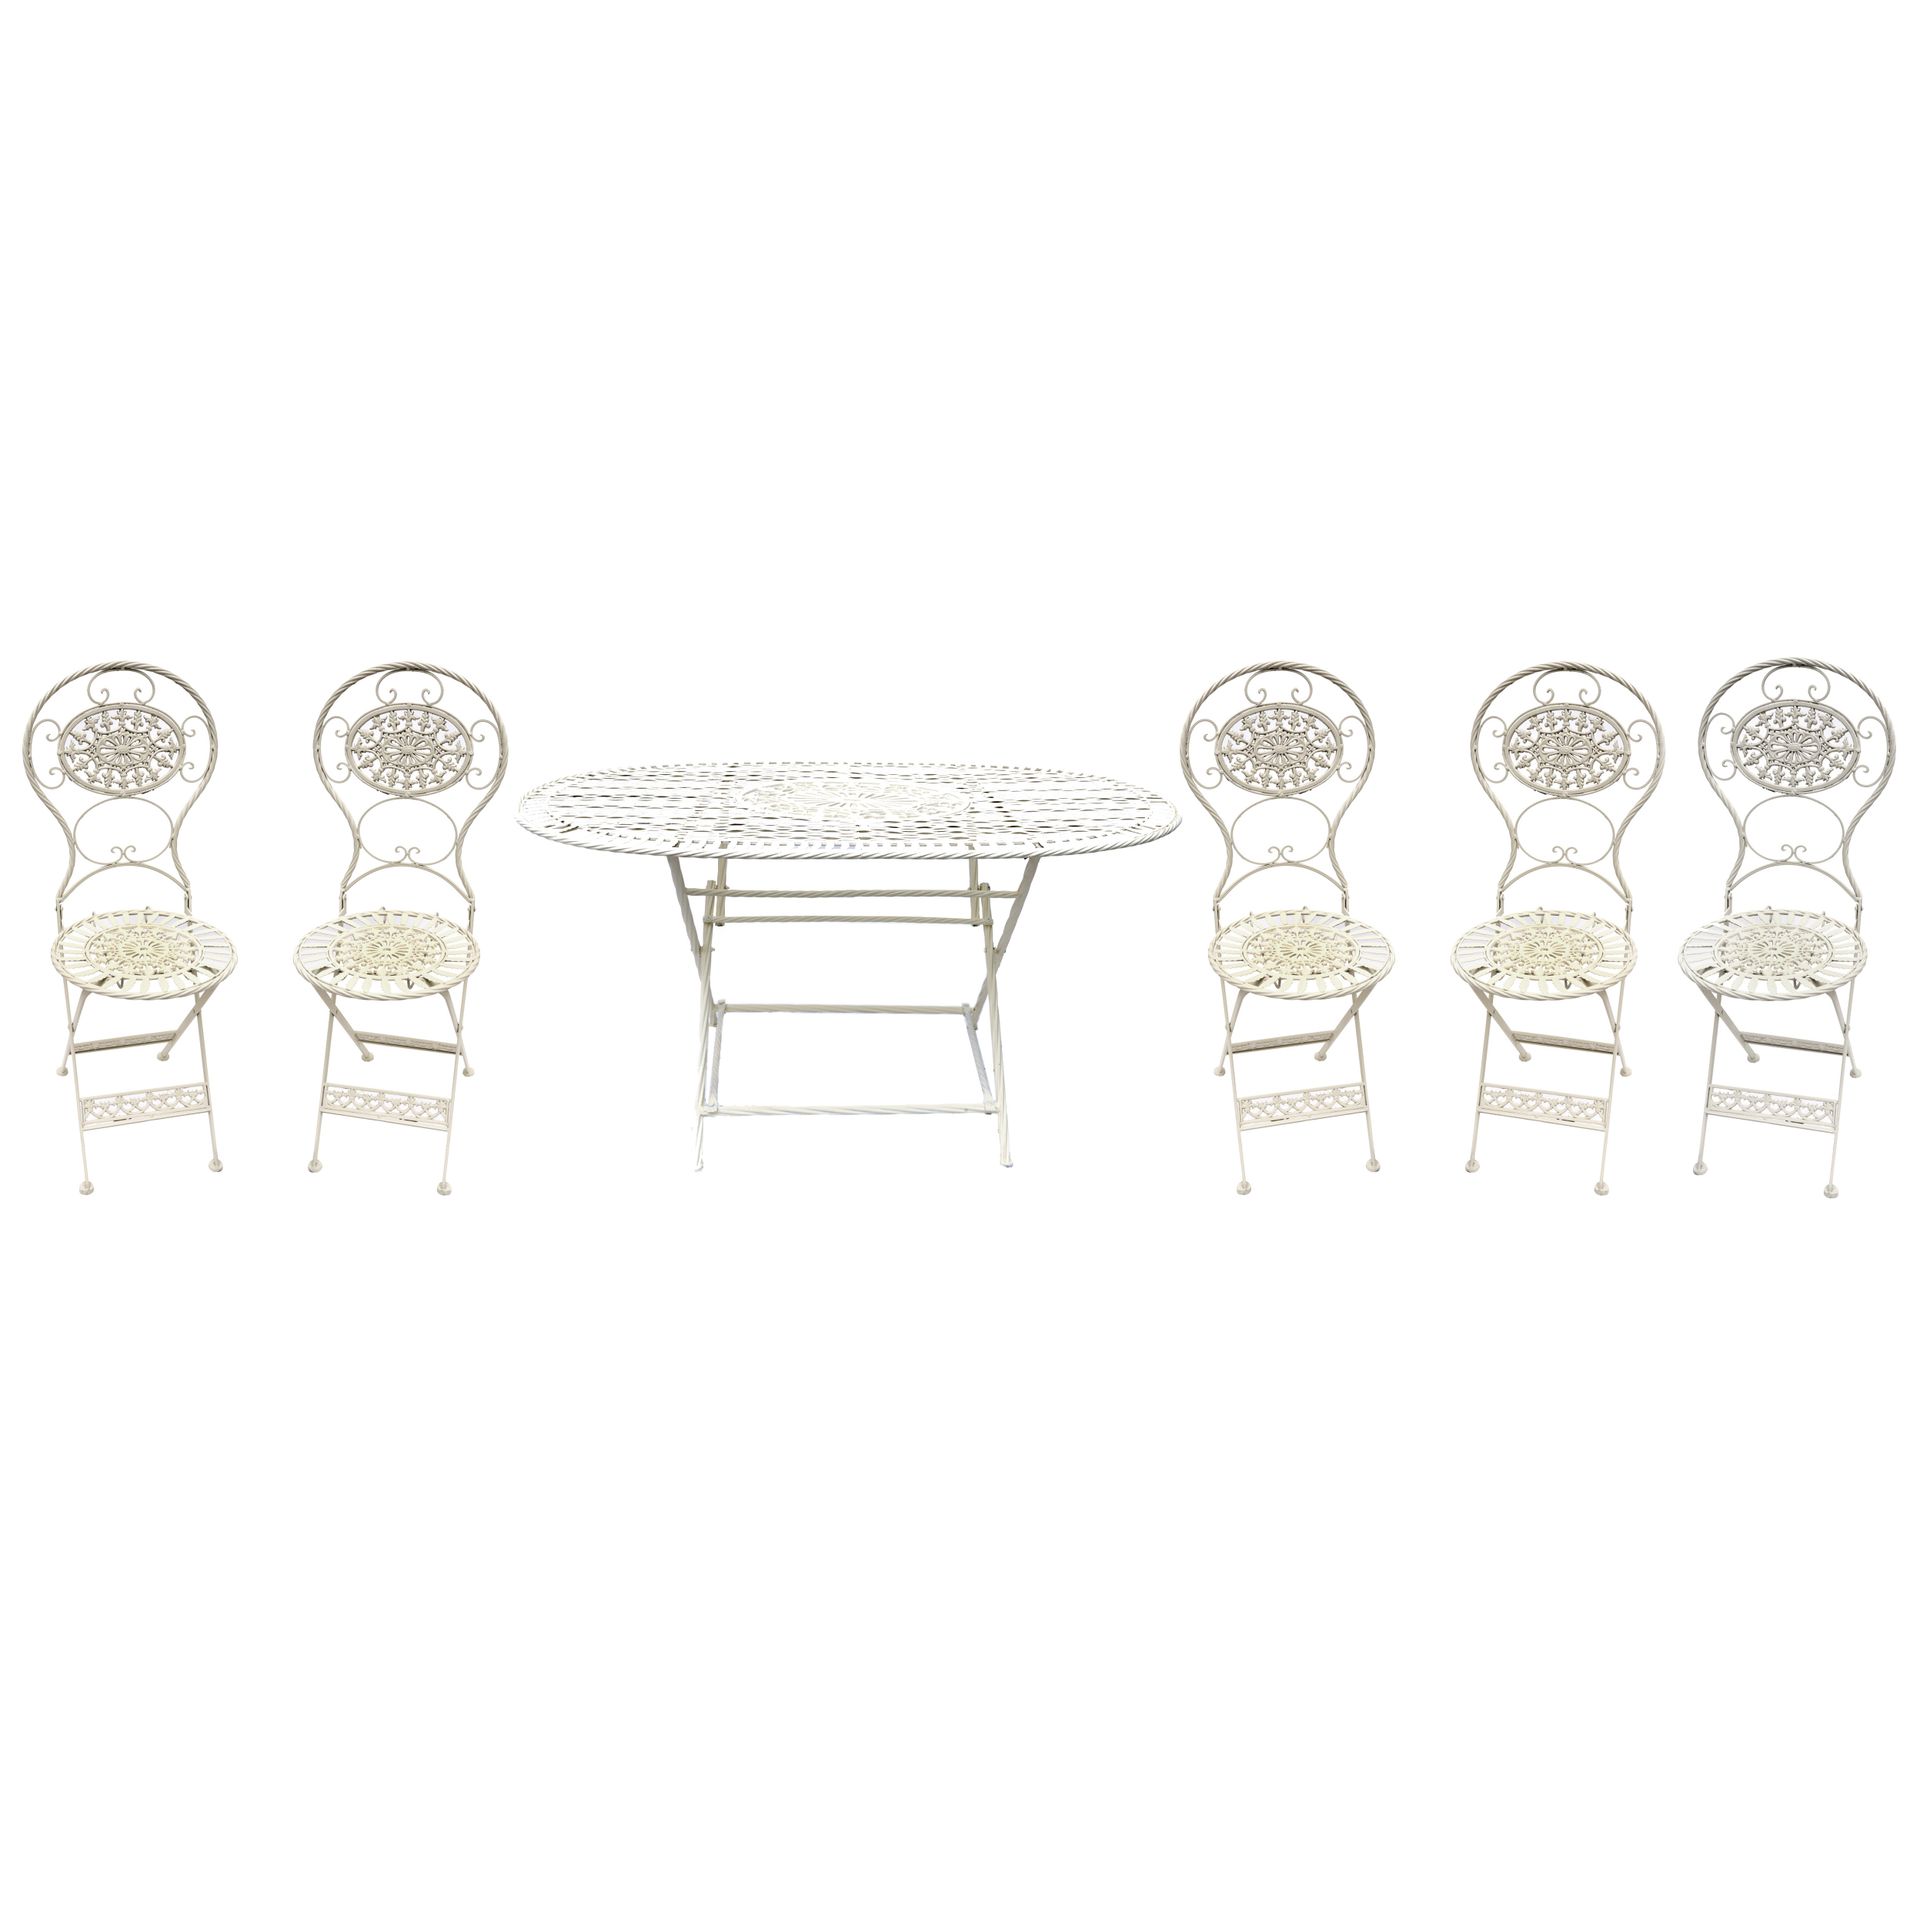 Garden furniture, consisting of table and five folding chairs métal commun, tabl&hellip;